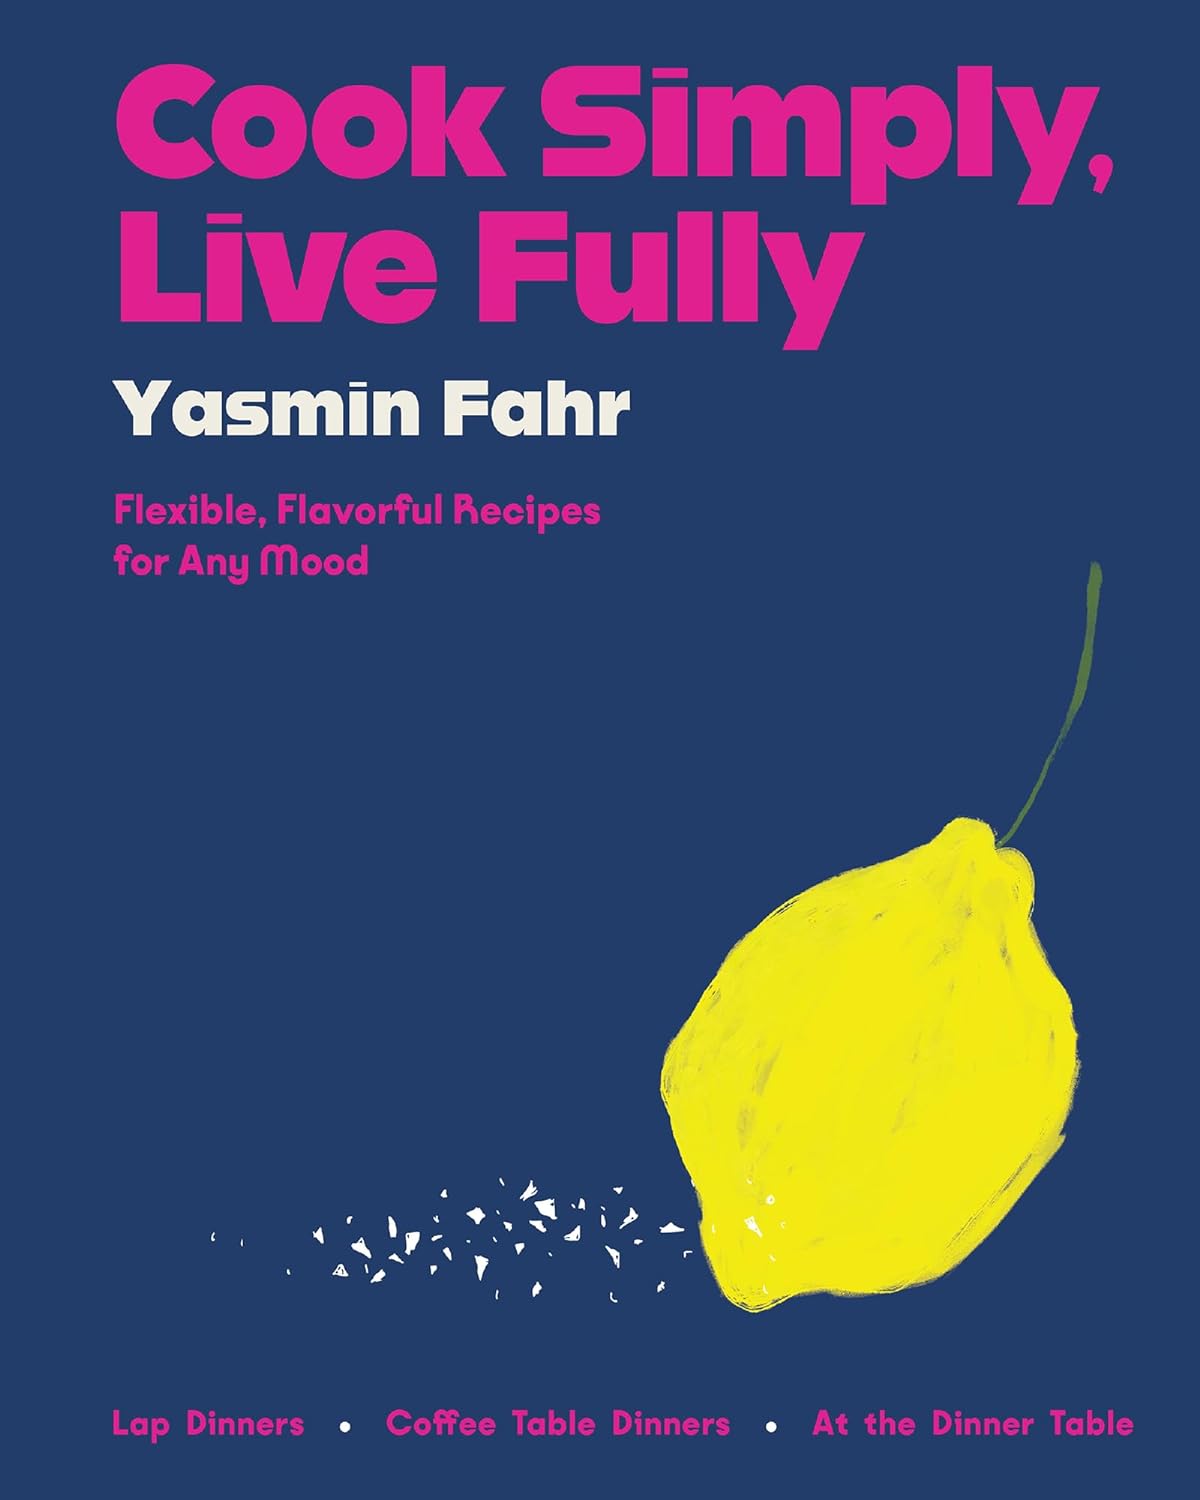 Cook Simply, Live Fully: Flexible, Flavorful Recipes for Any Mood (Yasmin Fahr)